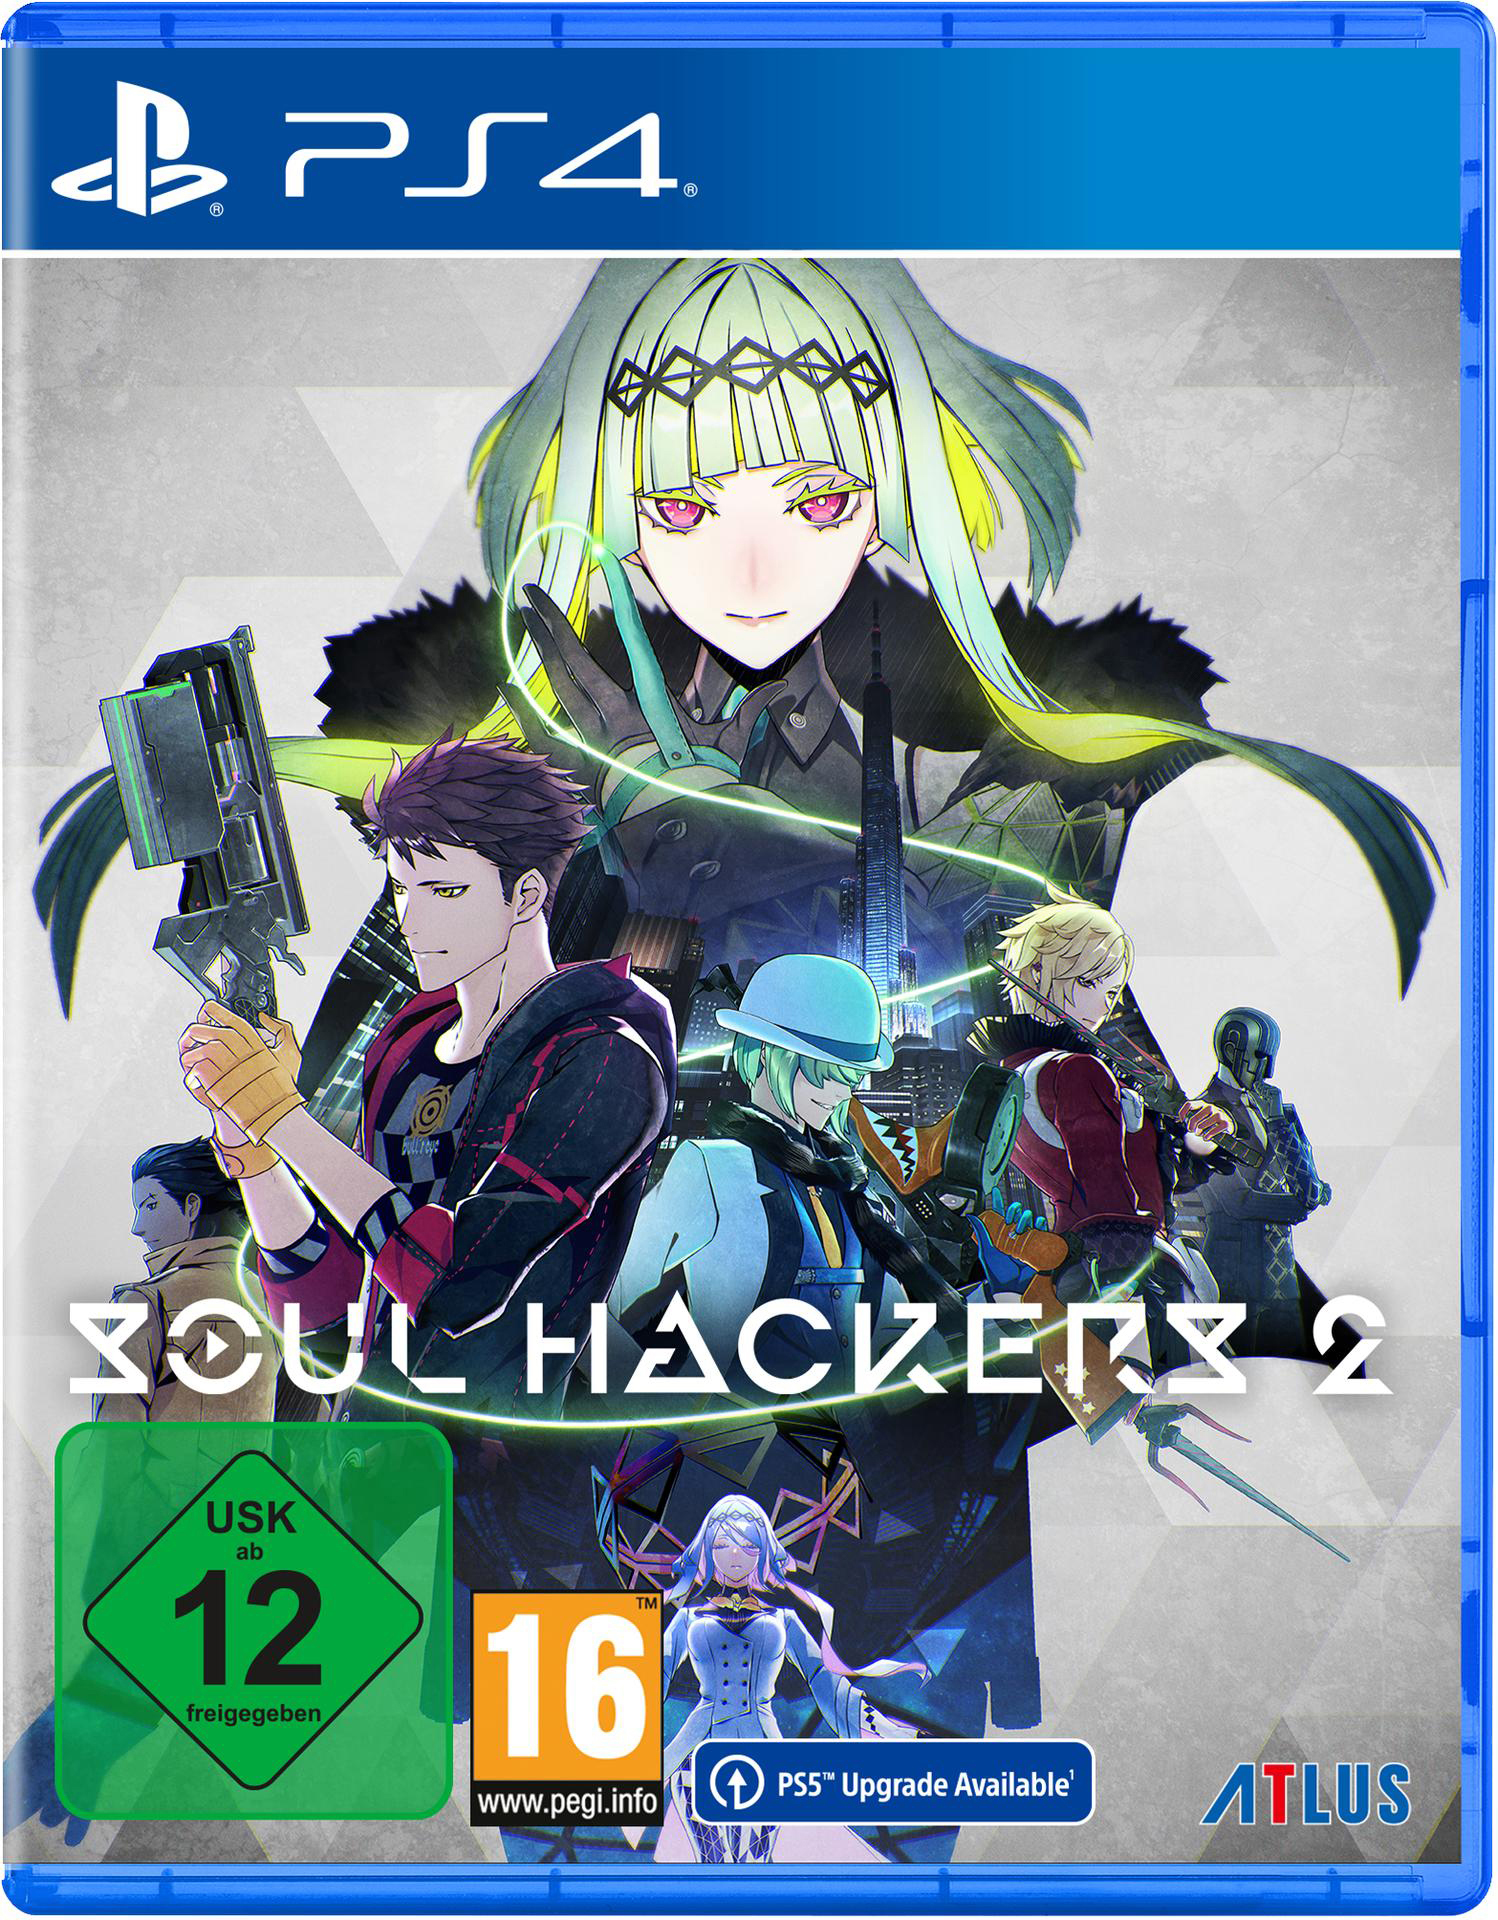 PS4 2 SOUL HACKERS - [PlayStation 4]